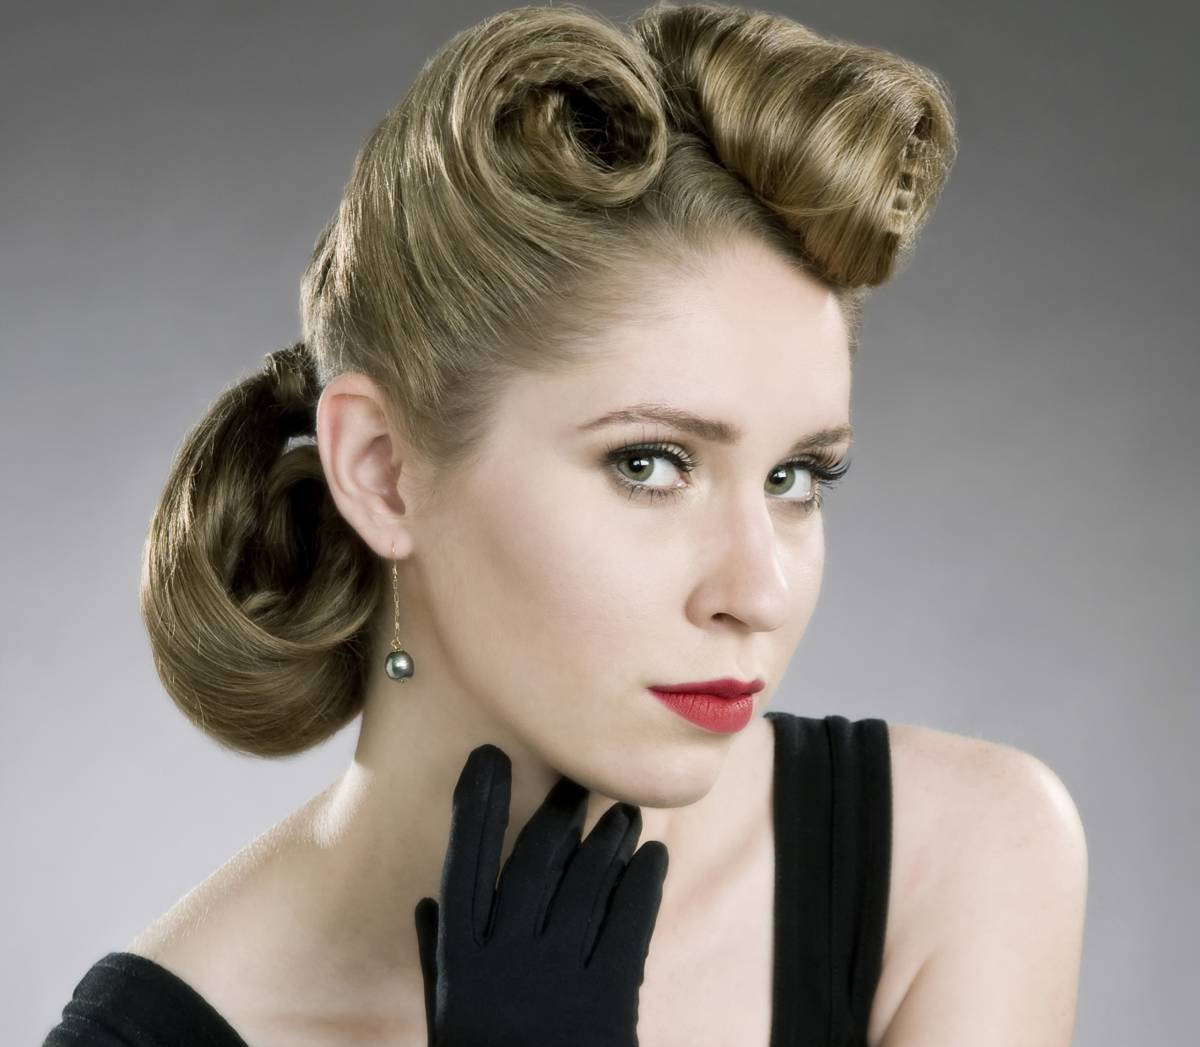 1950S Female Hairstyles
 Hairstyles That Defined the Best of the 1950s Hair